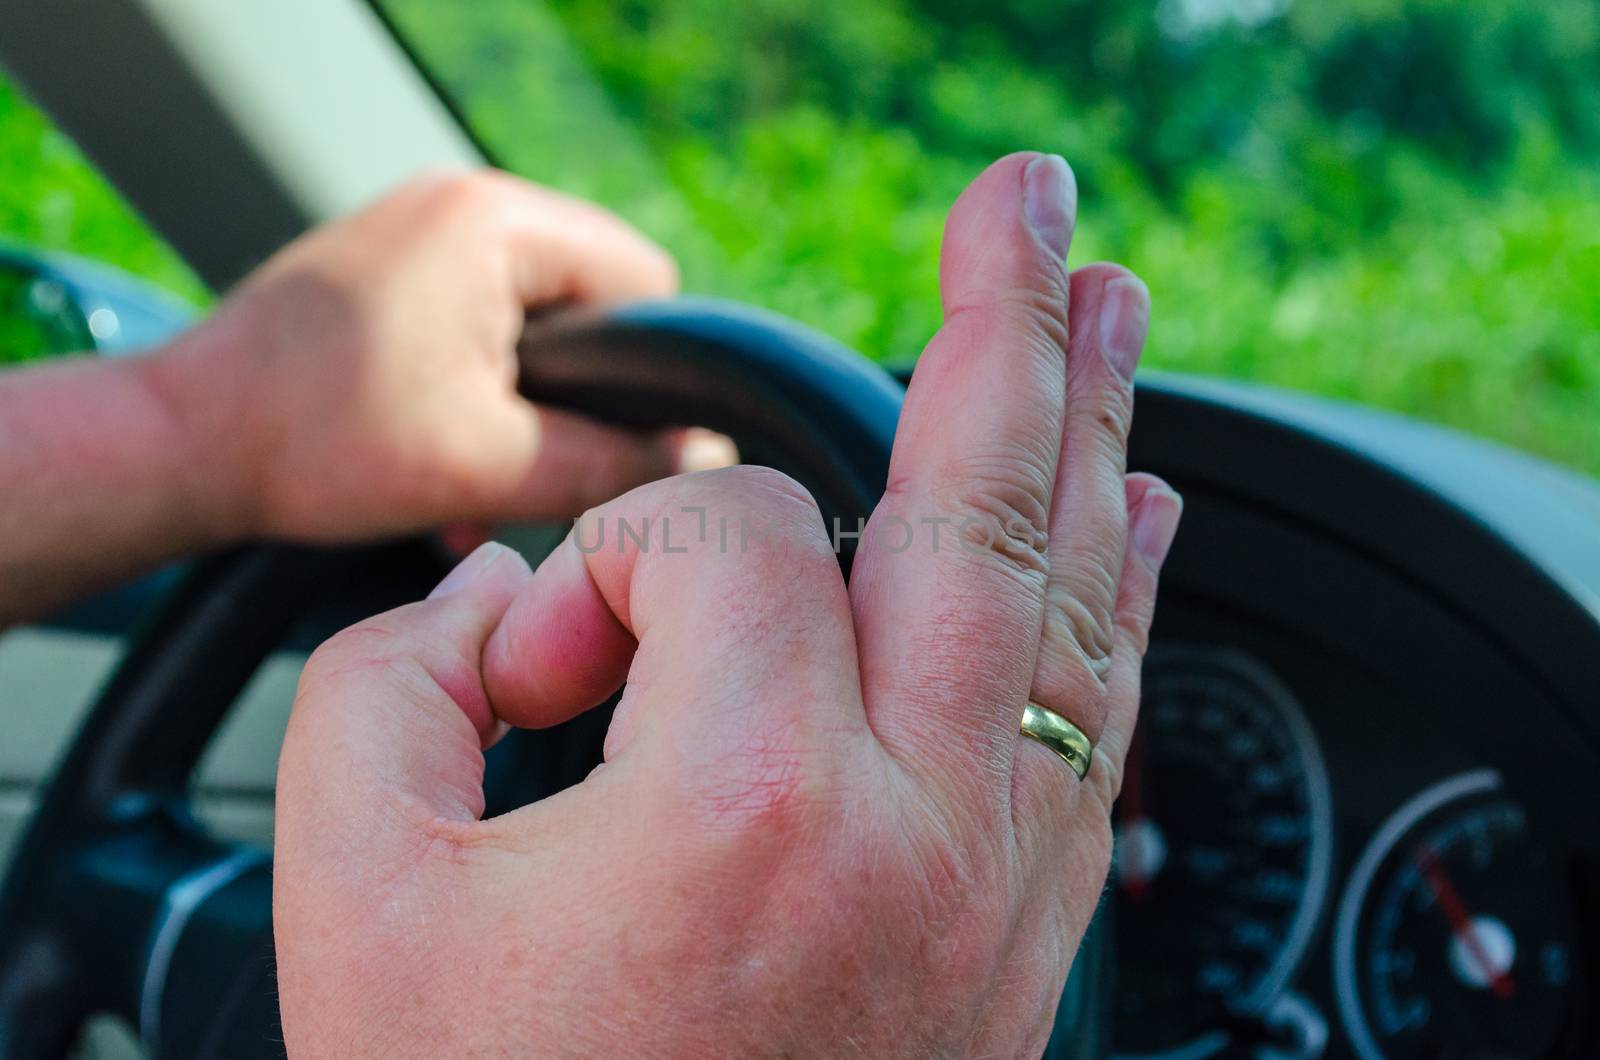 Hand on the wheel, the other hand shows the OK sign.